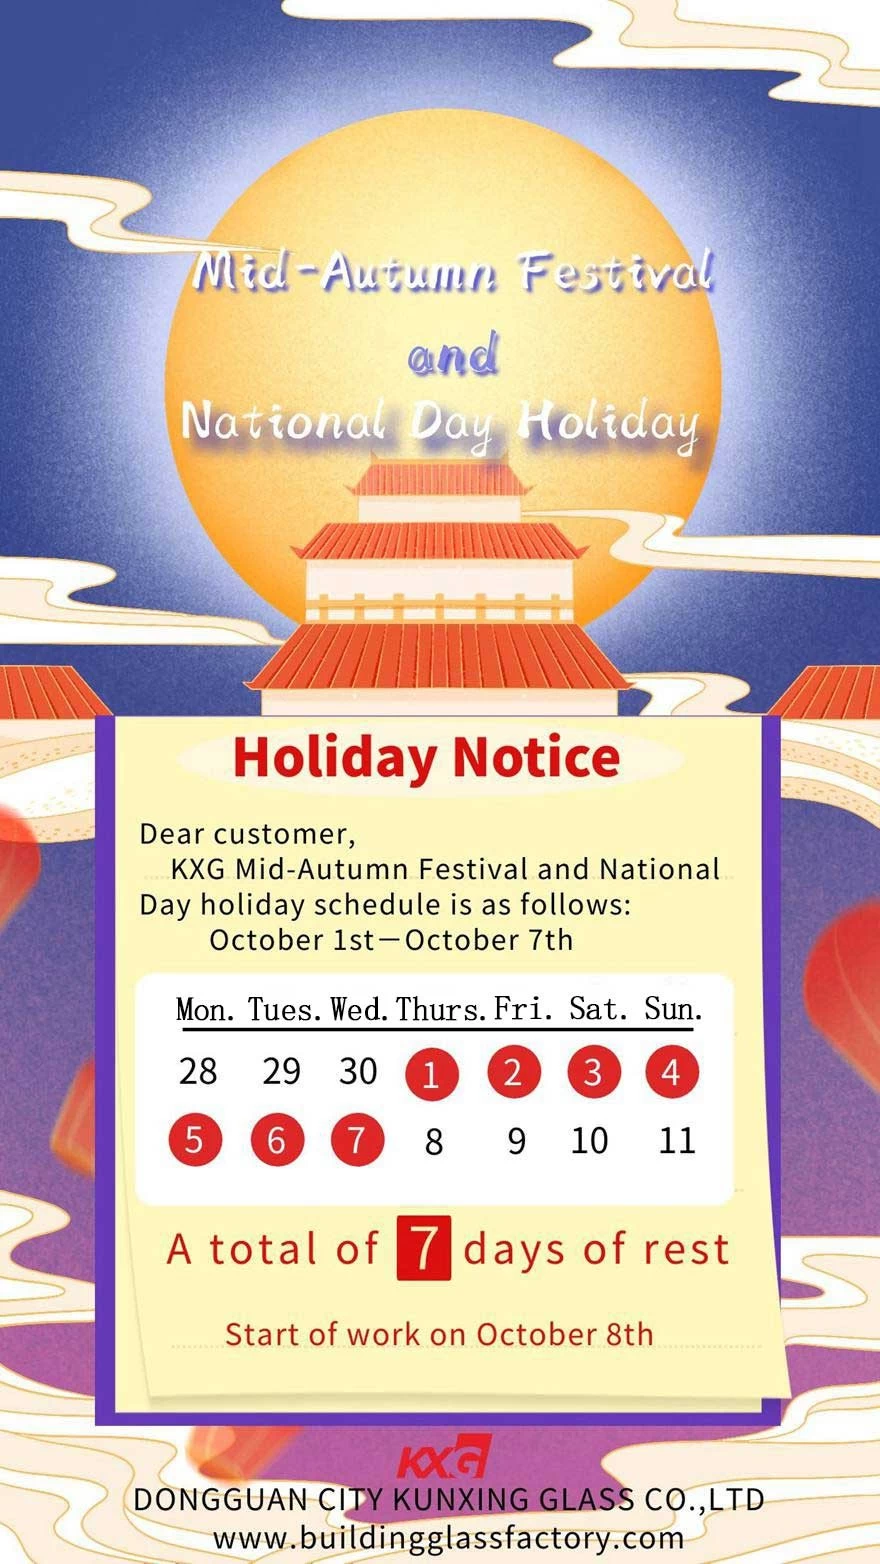 KXG Mid-Autumn Festival and National Day holiday notice